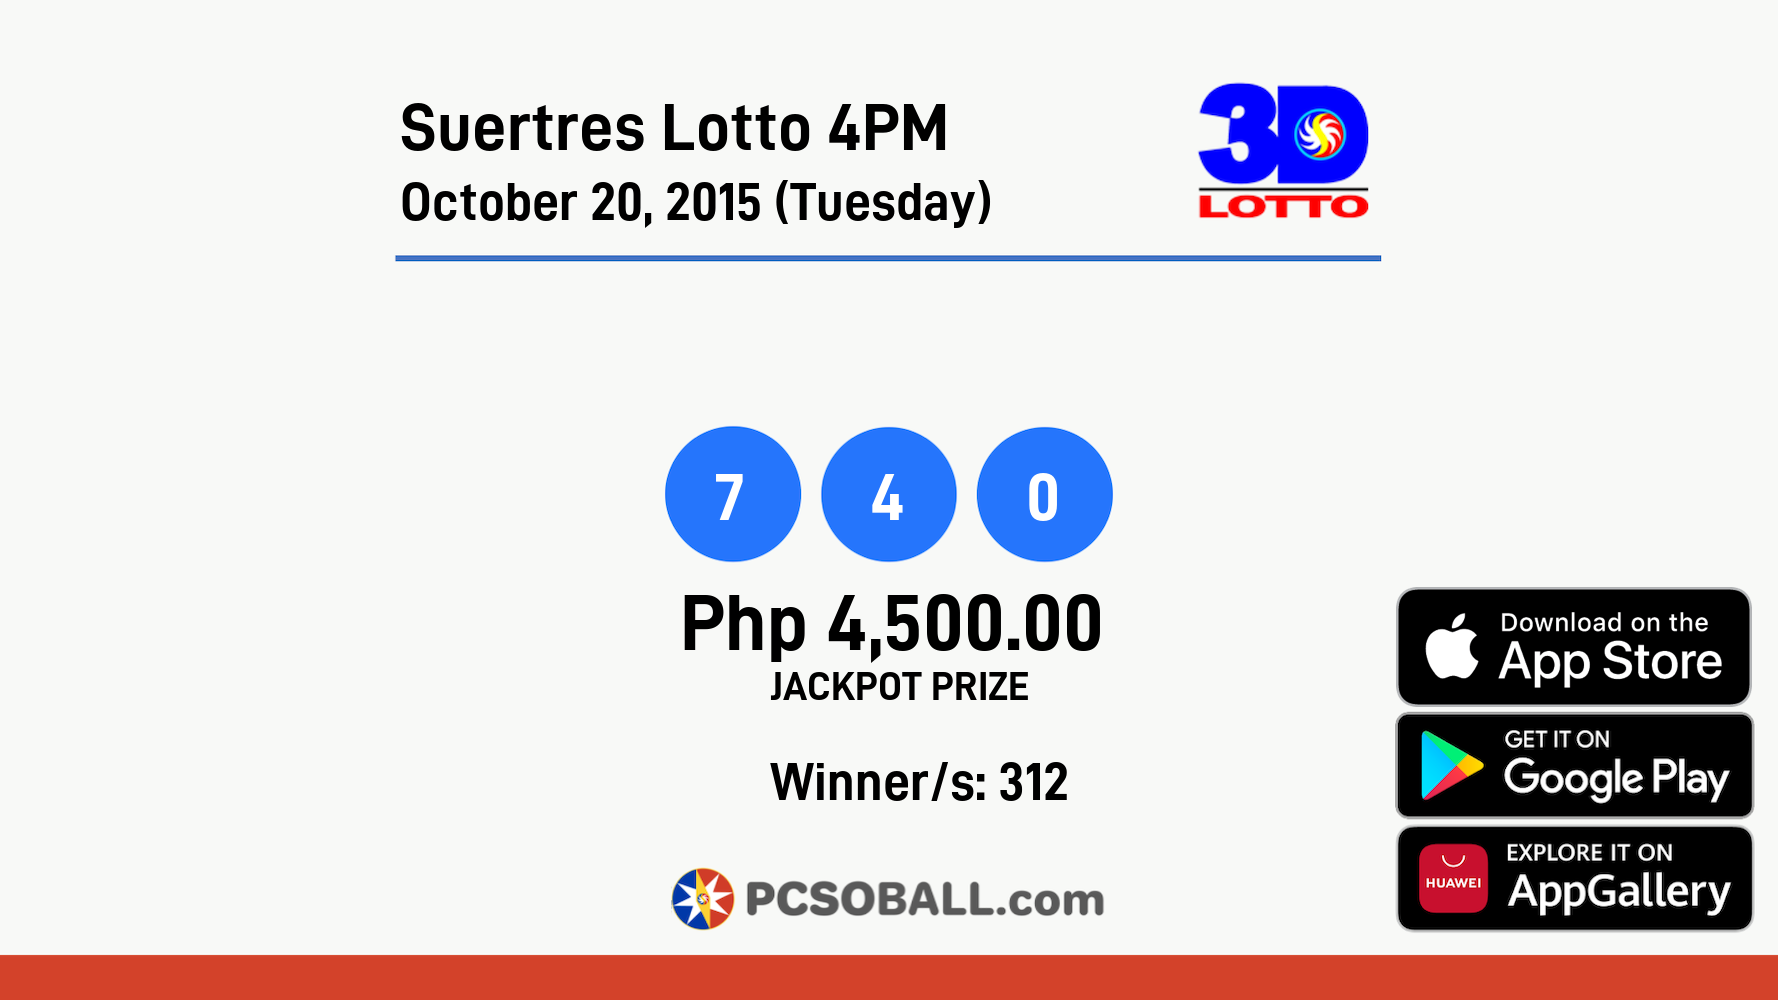 Suertres Lotto 4PM October 20, 2015 (Tuesday) Result